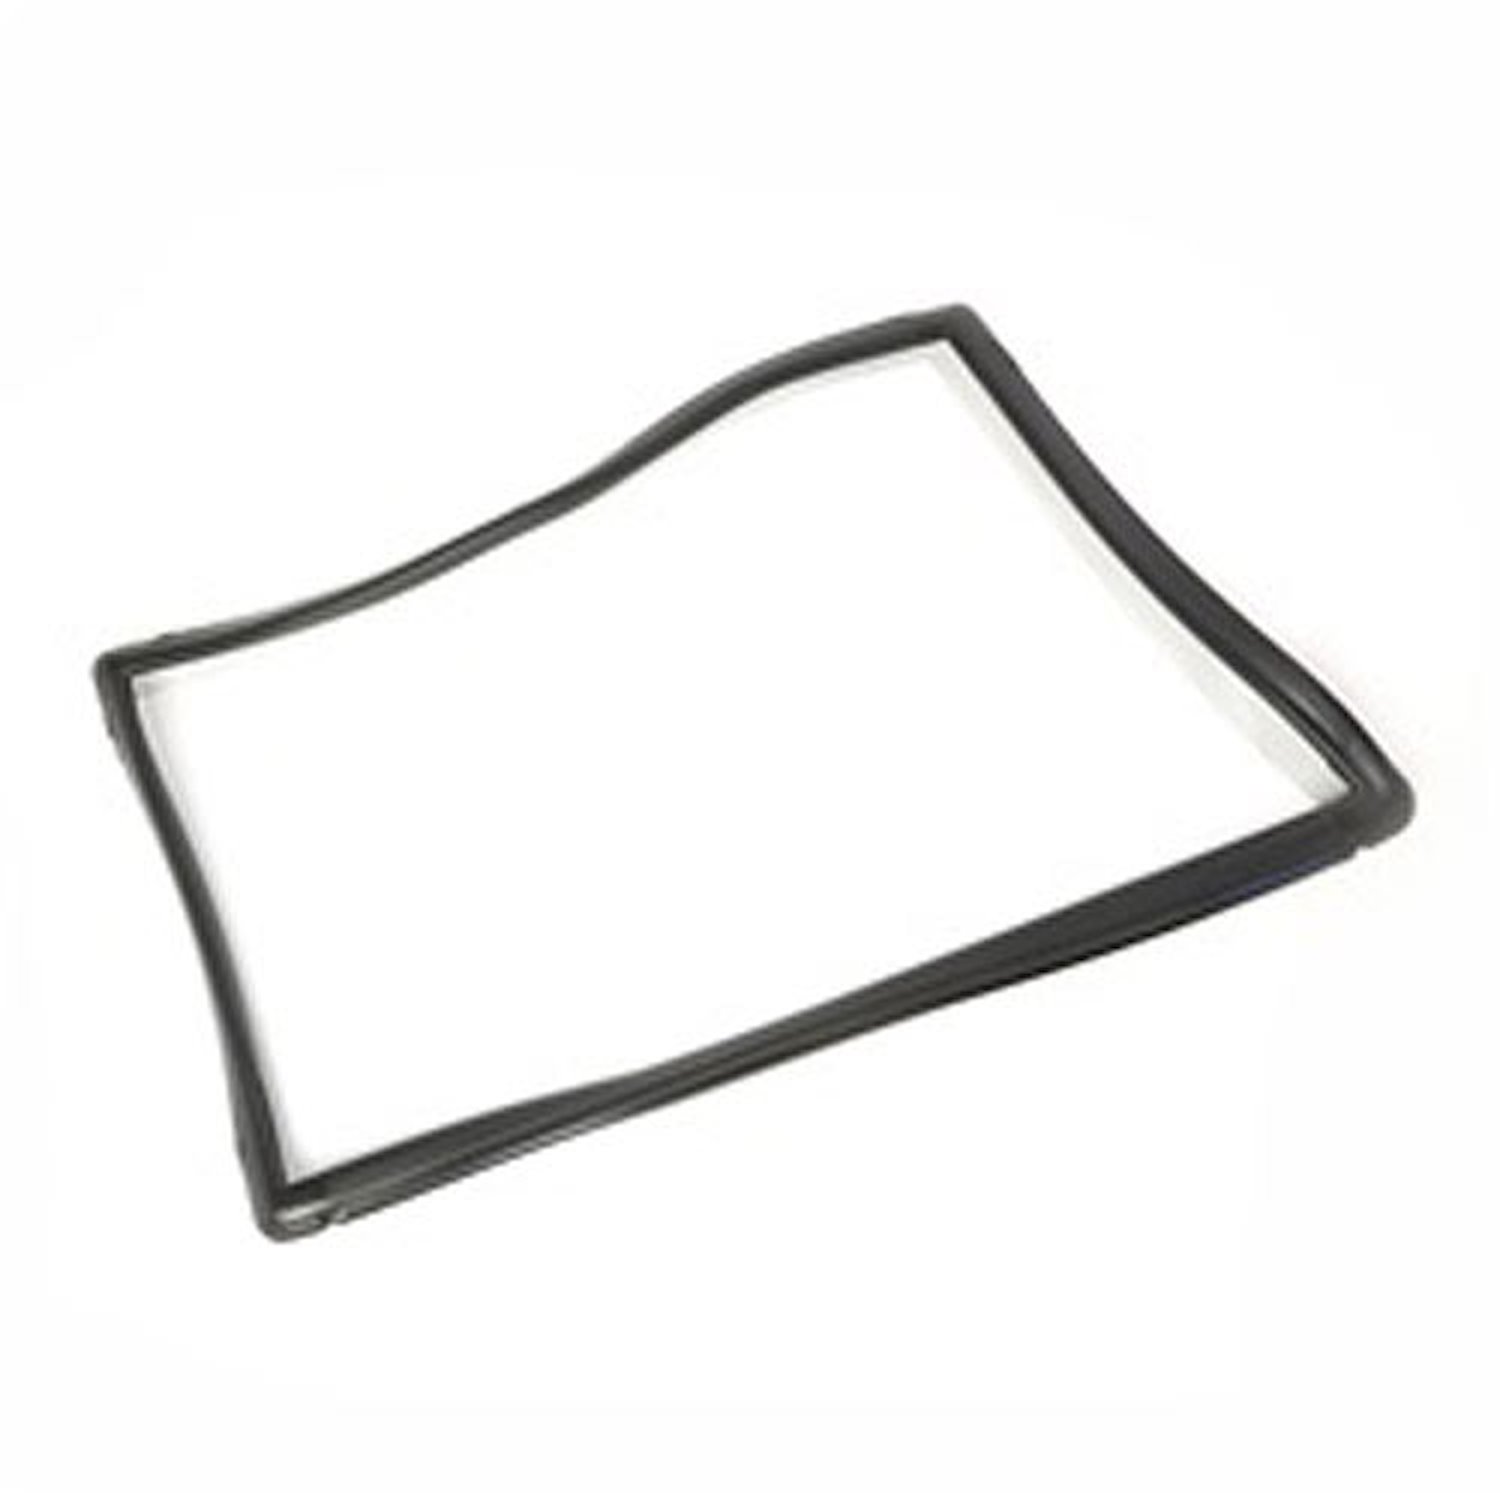 This right rear quarter window seal from Omix-ADA